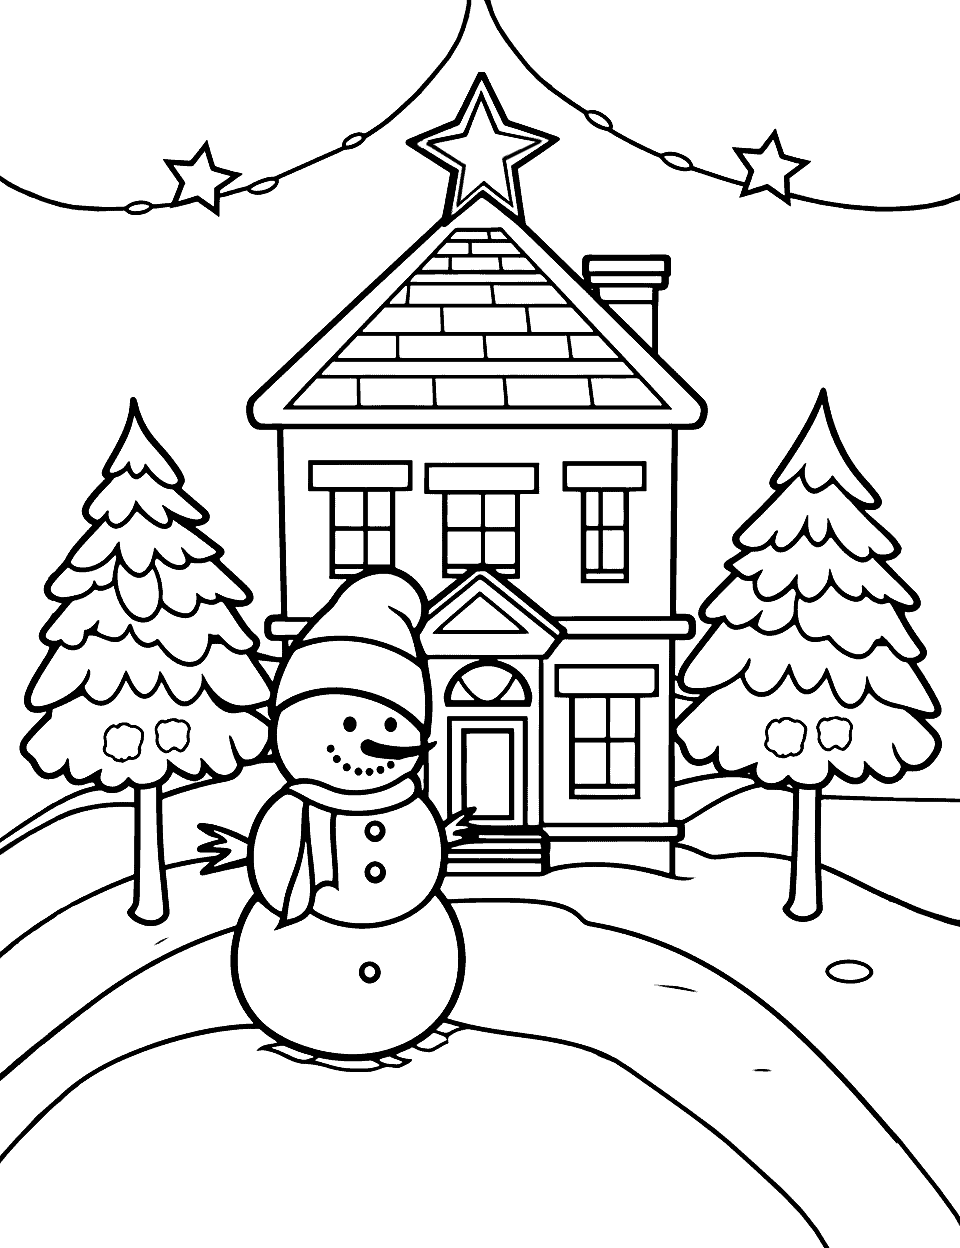 Holiday Lights Winter Coloring Page - A holiday scene of a house decorated with Christmas lights and a large Christmas tree.